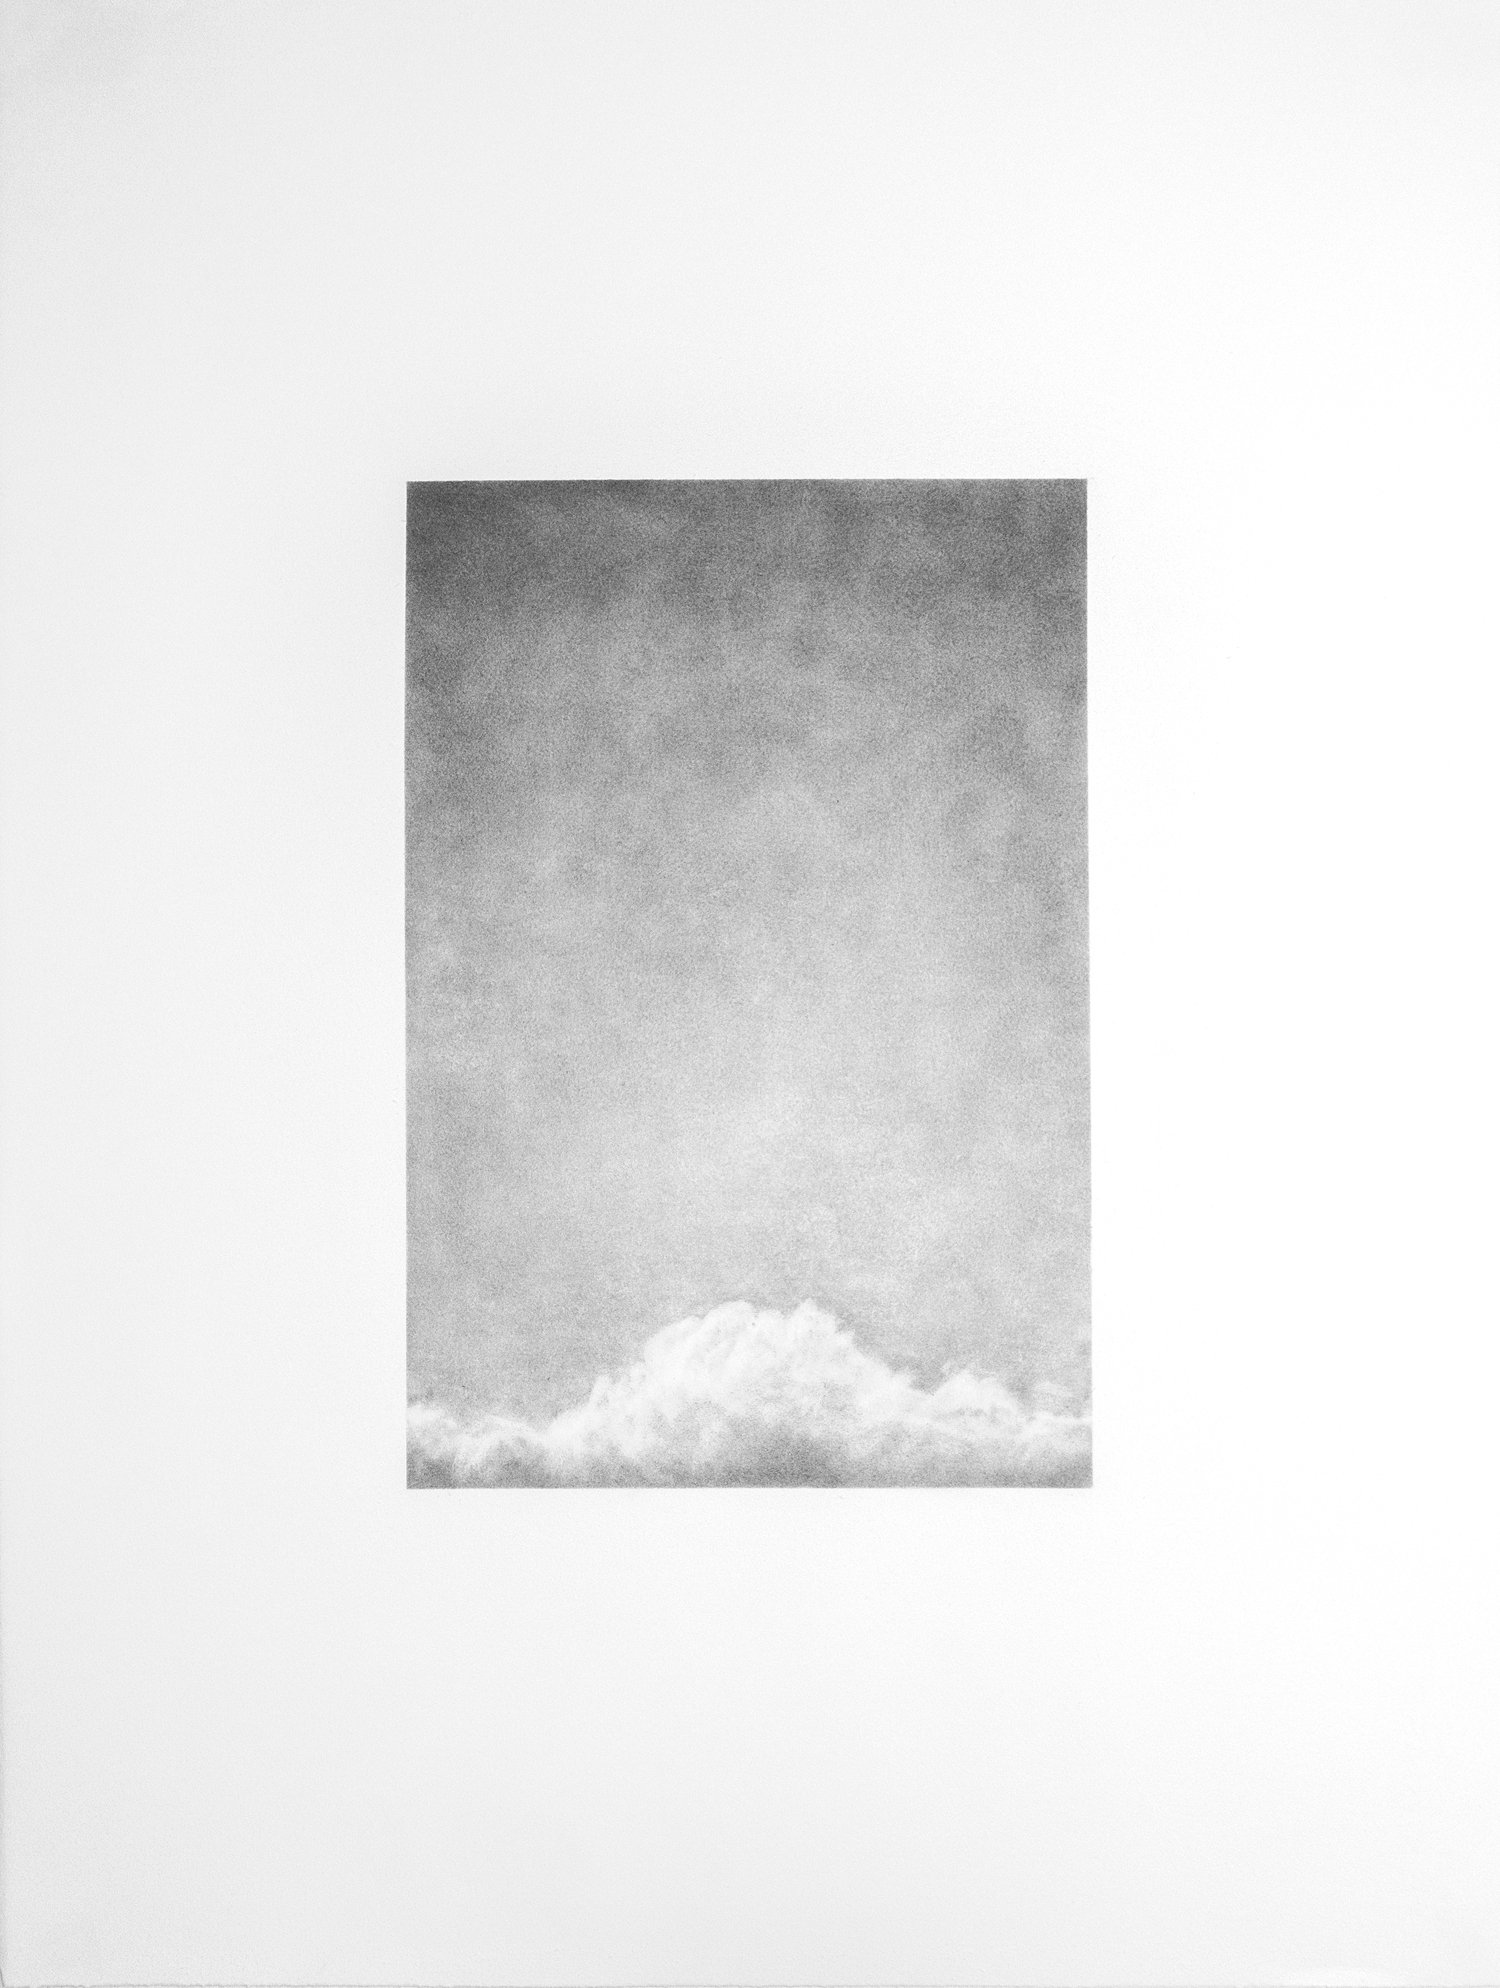   John MacConnell,  Clouds  (Fire Island Pines 2), 2020, graphite on Rives BFK, 30"x22"   Inquire  